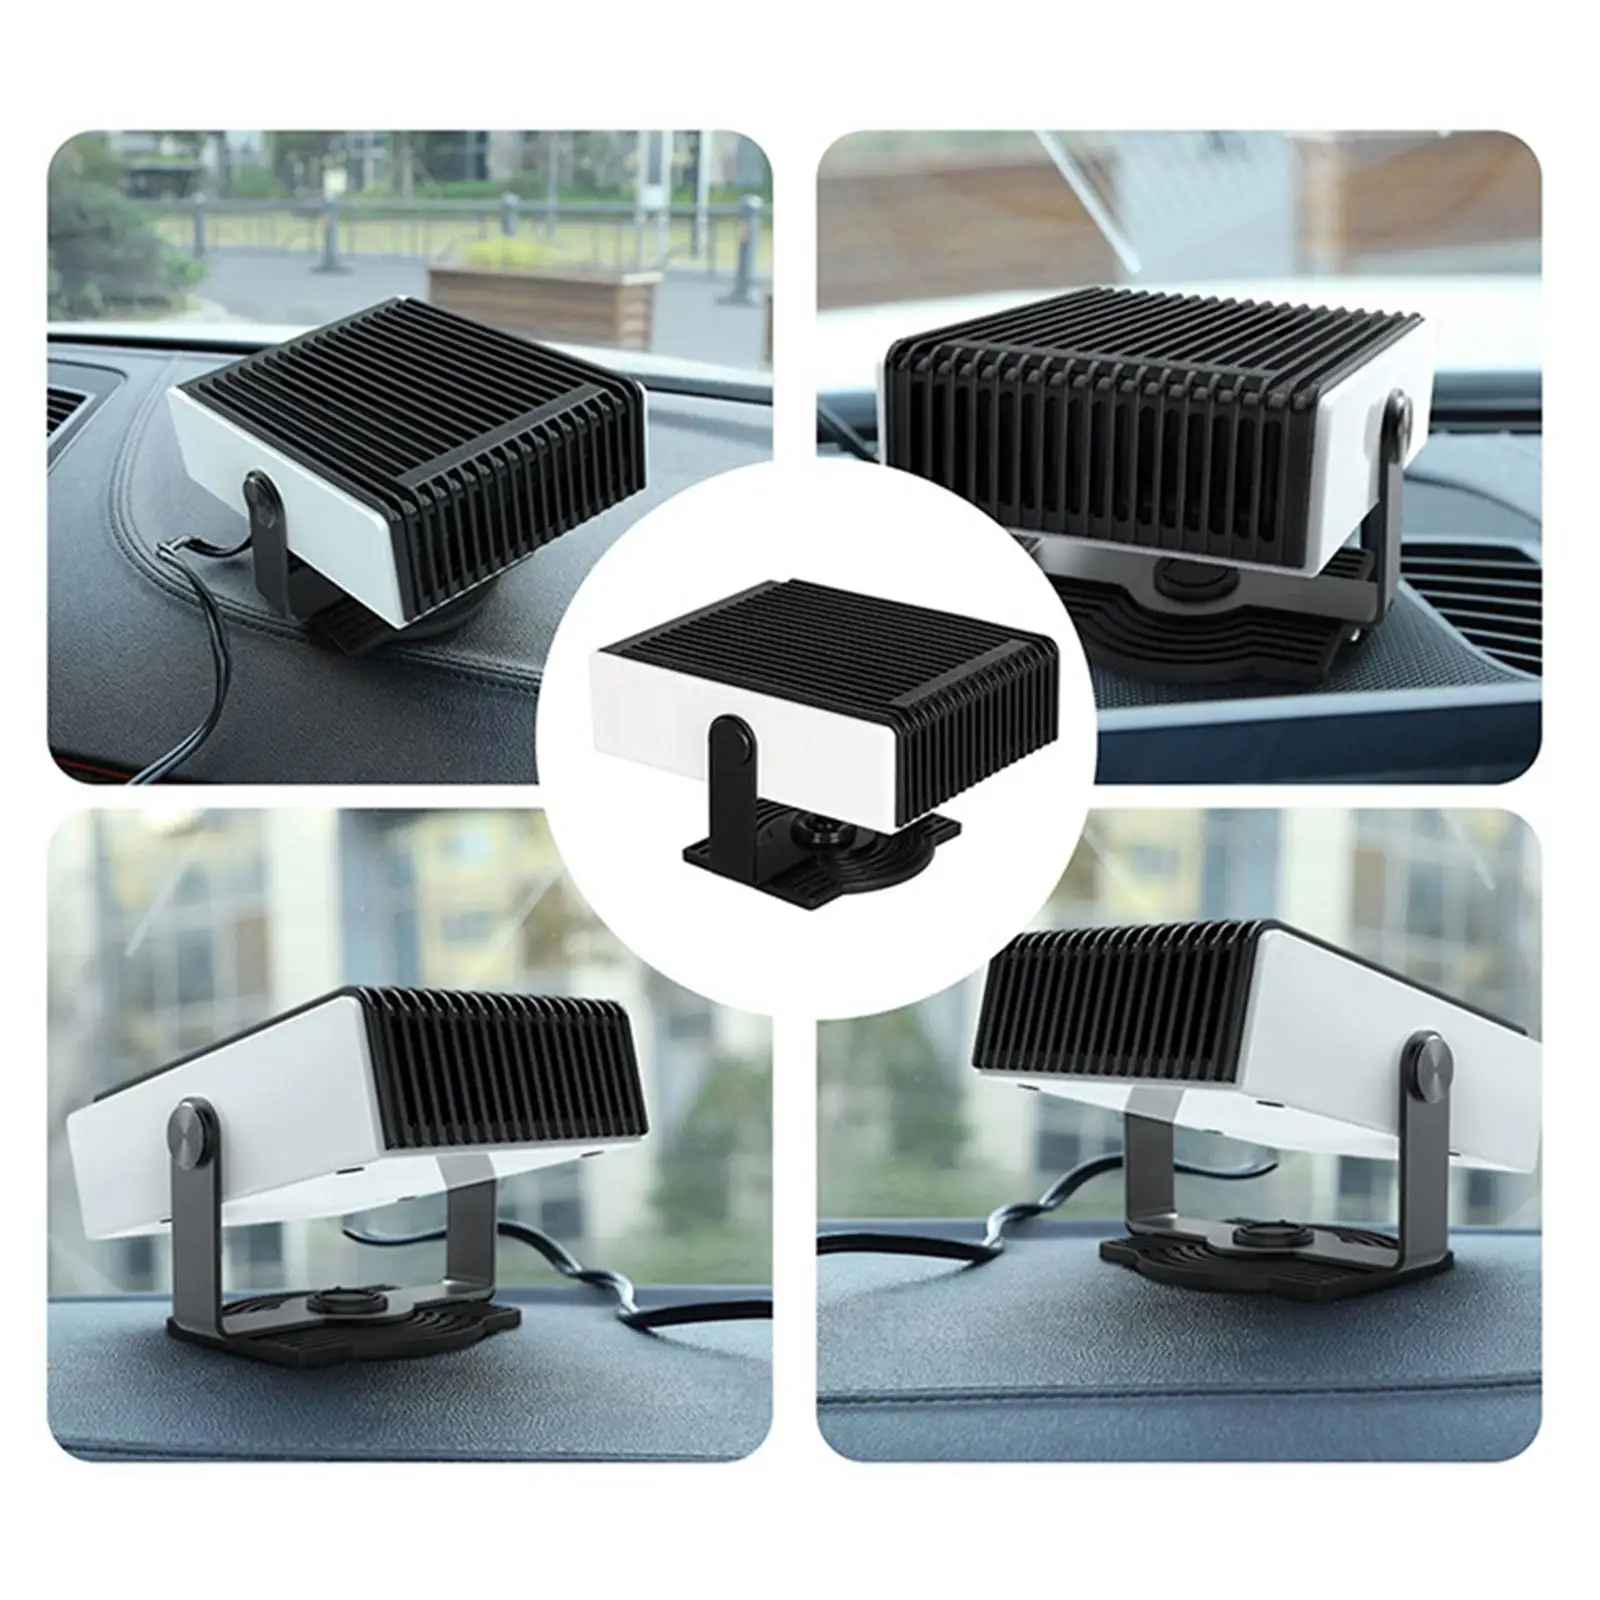 Auto Heater Fan 2 in 1 Fast Heating Multifunction 2 Level for Winter Cig Lighter Plug